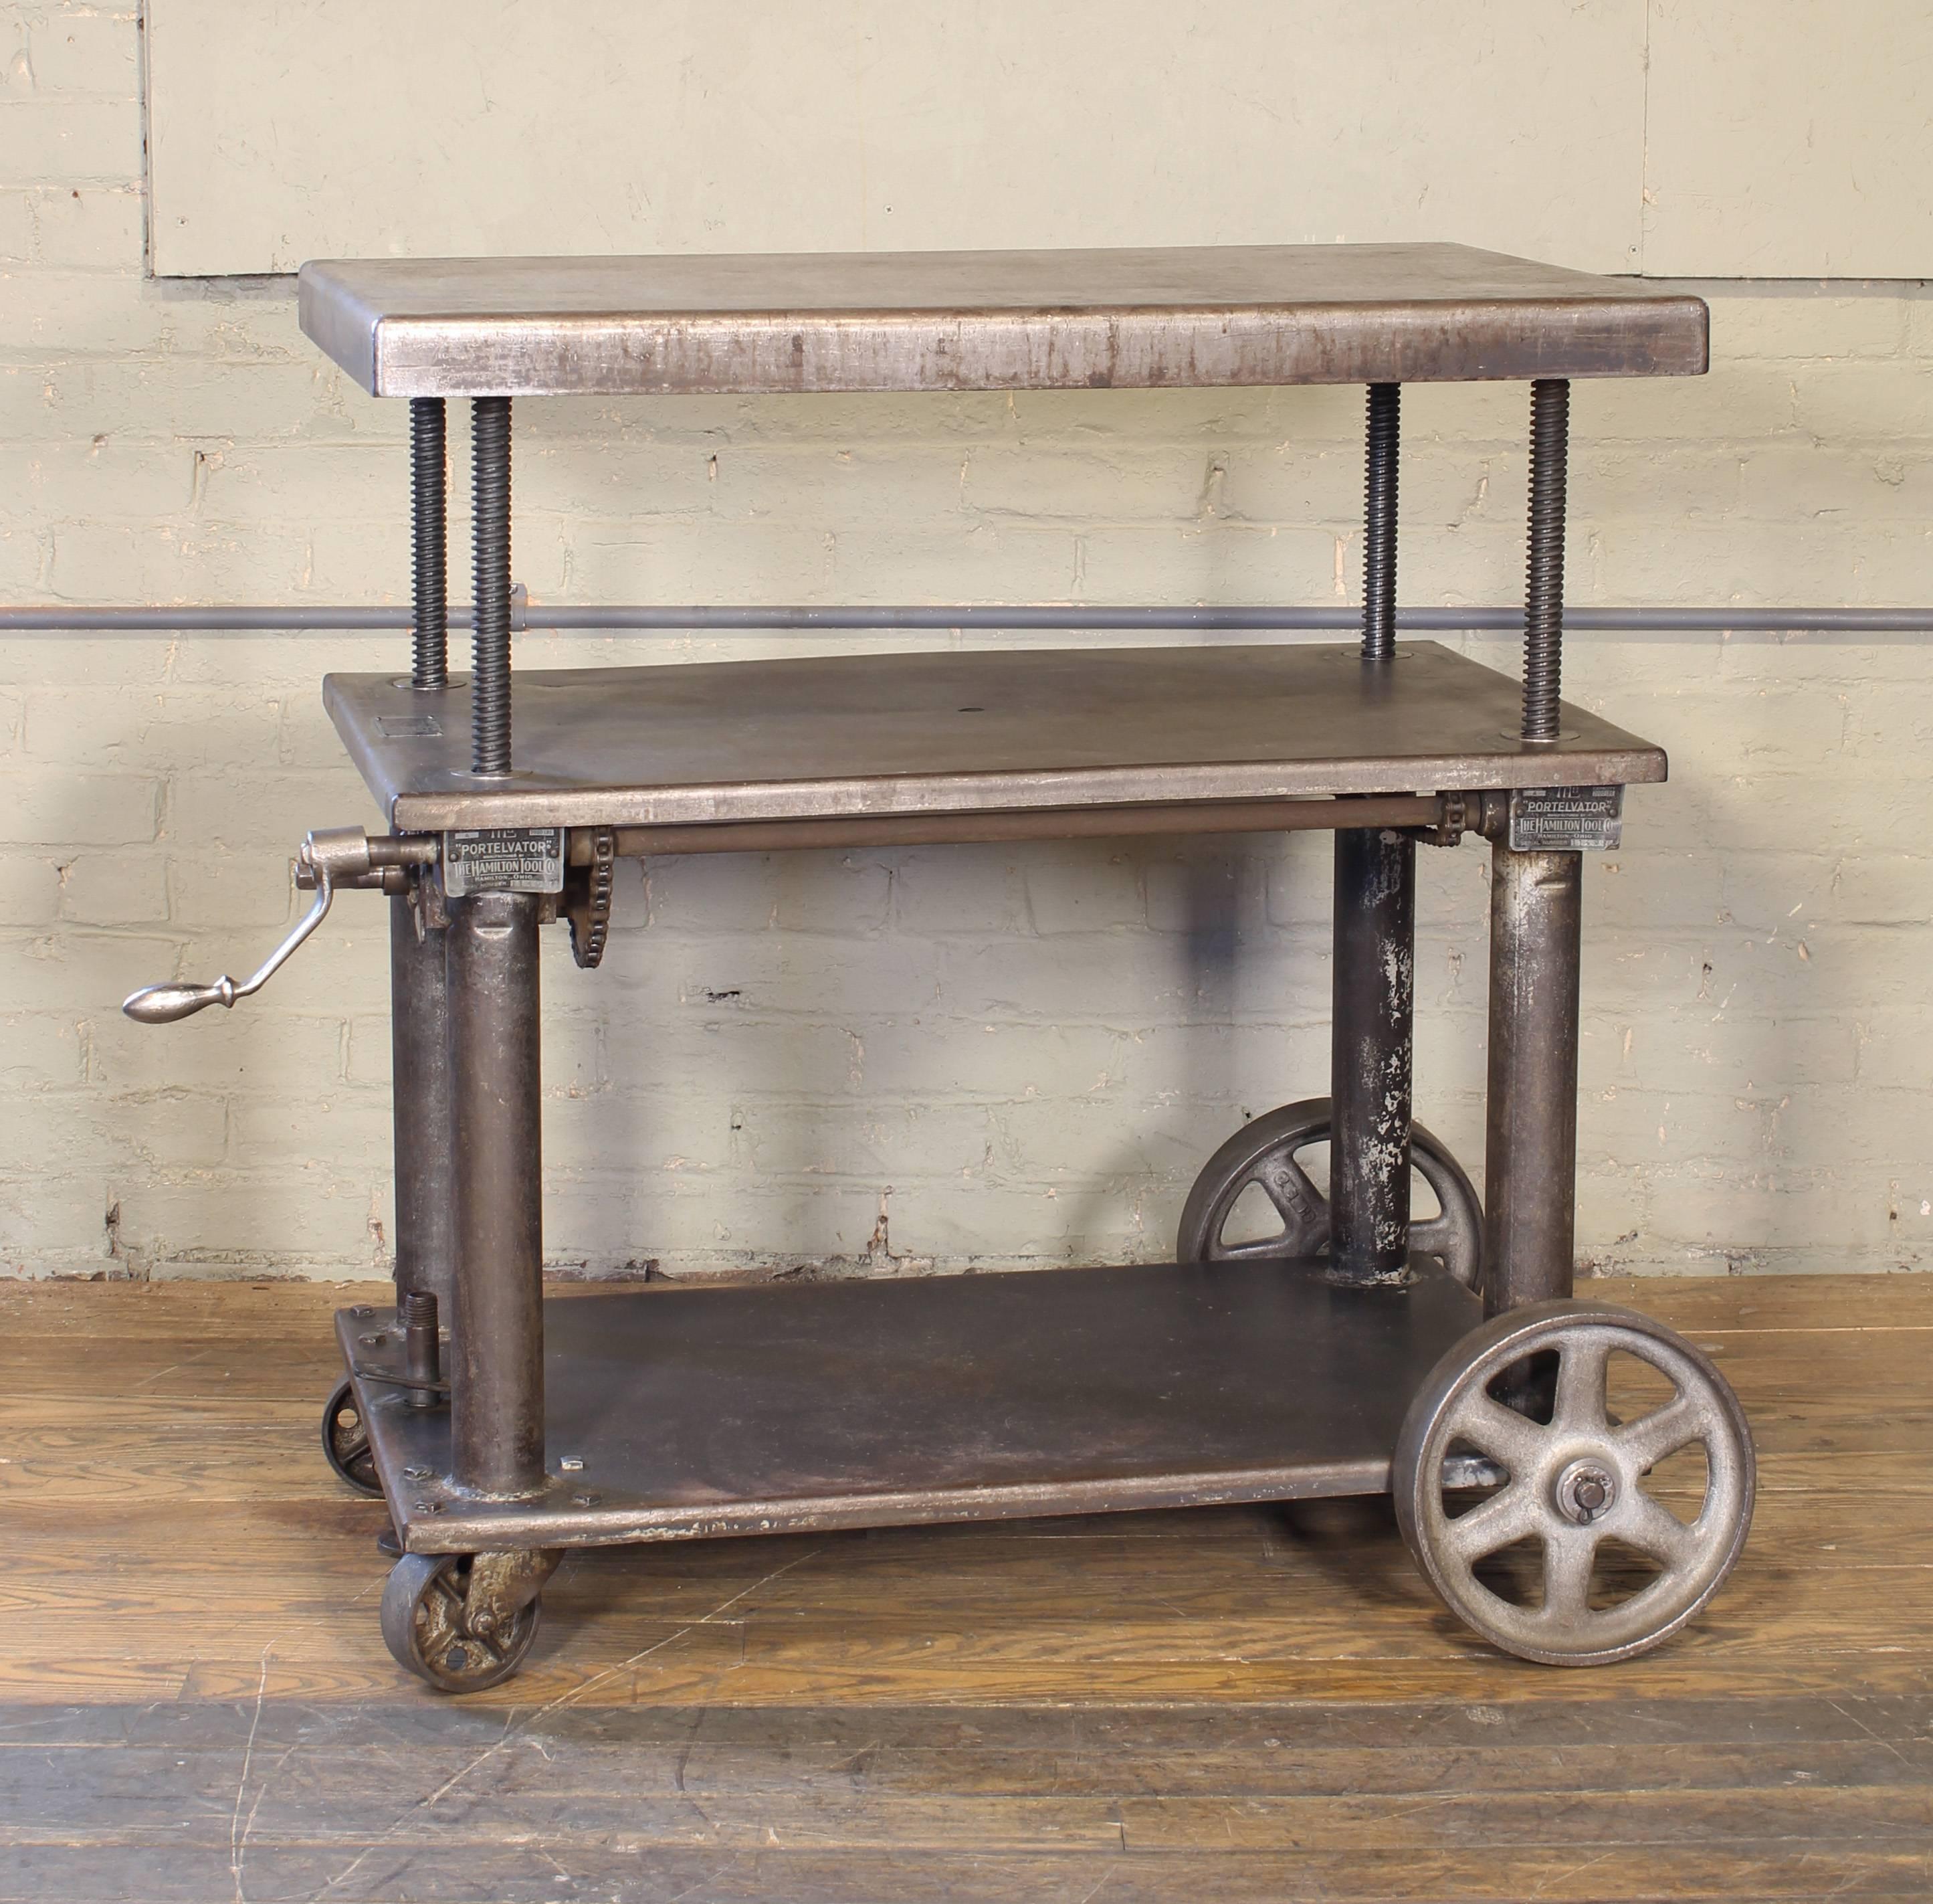 Original vintage Industrial adjustable metal, steel rolling three tier lift bar cart / table with cast iron casters / wheels. Measure: Top is adjustable in height from 25 1/4